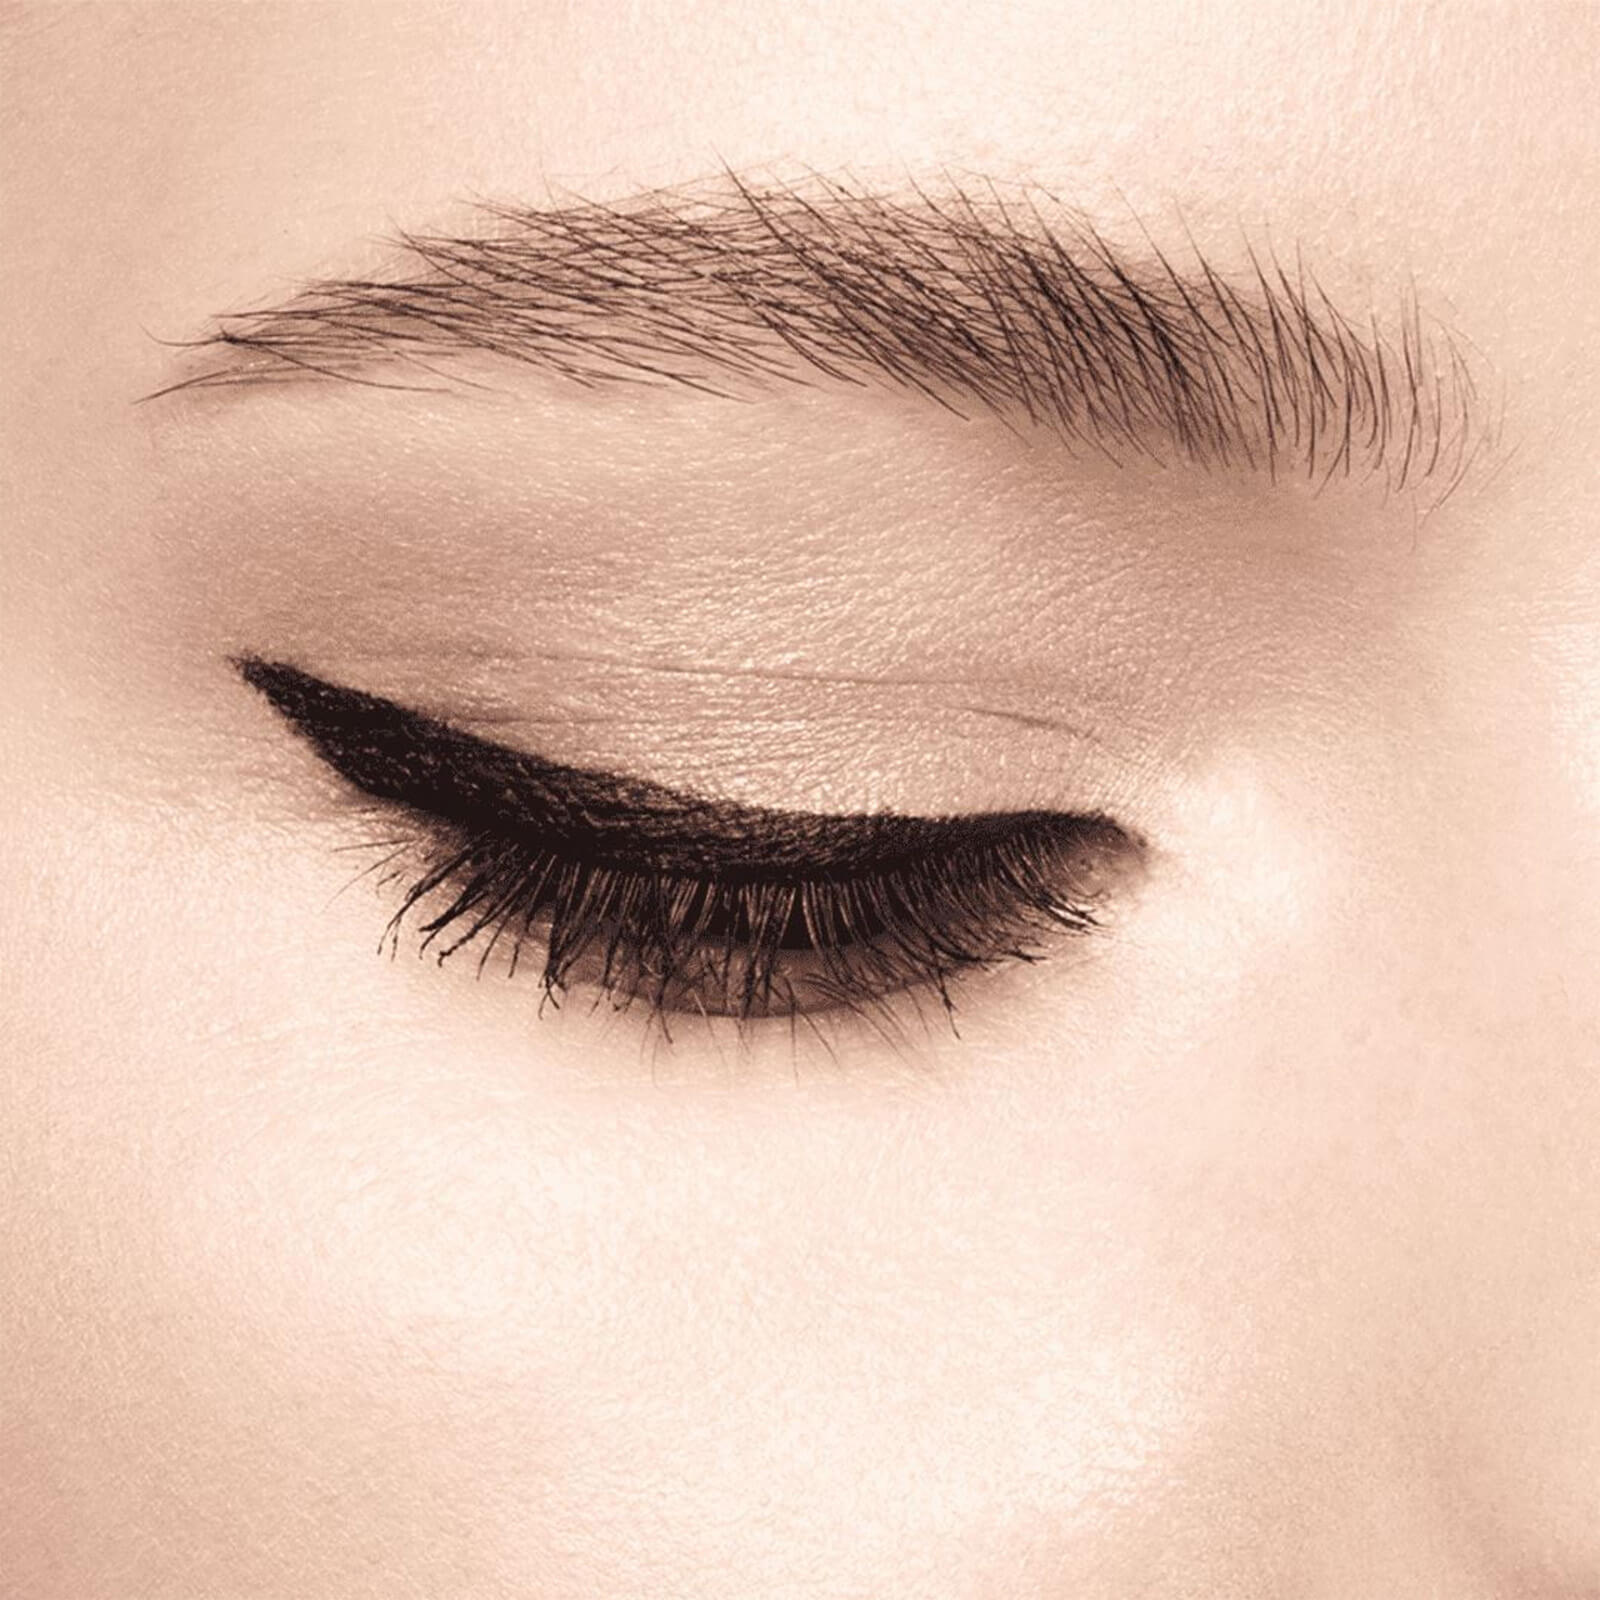 Precision Eye Liner Black | Note - Give Us Beauty